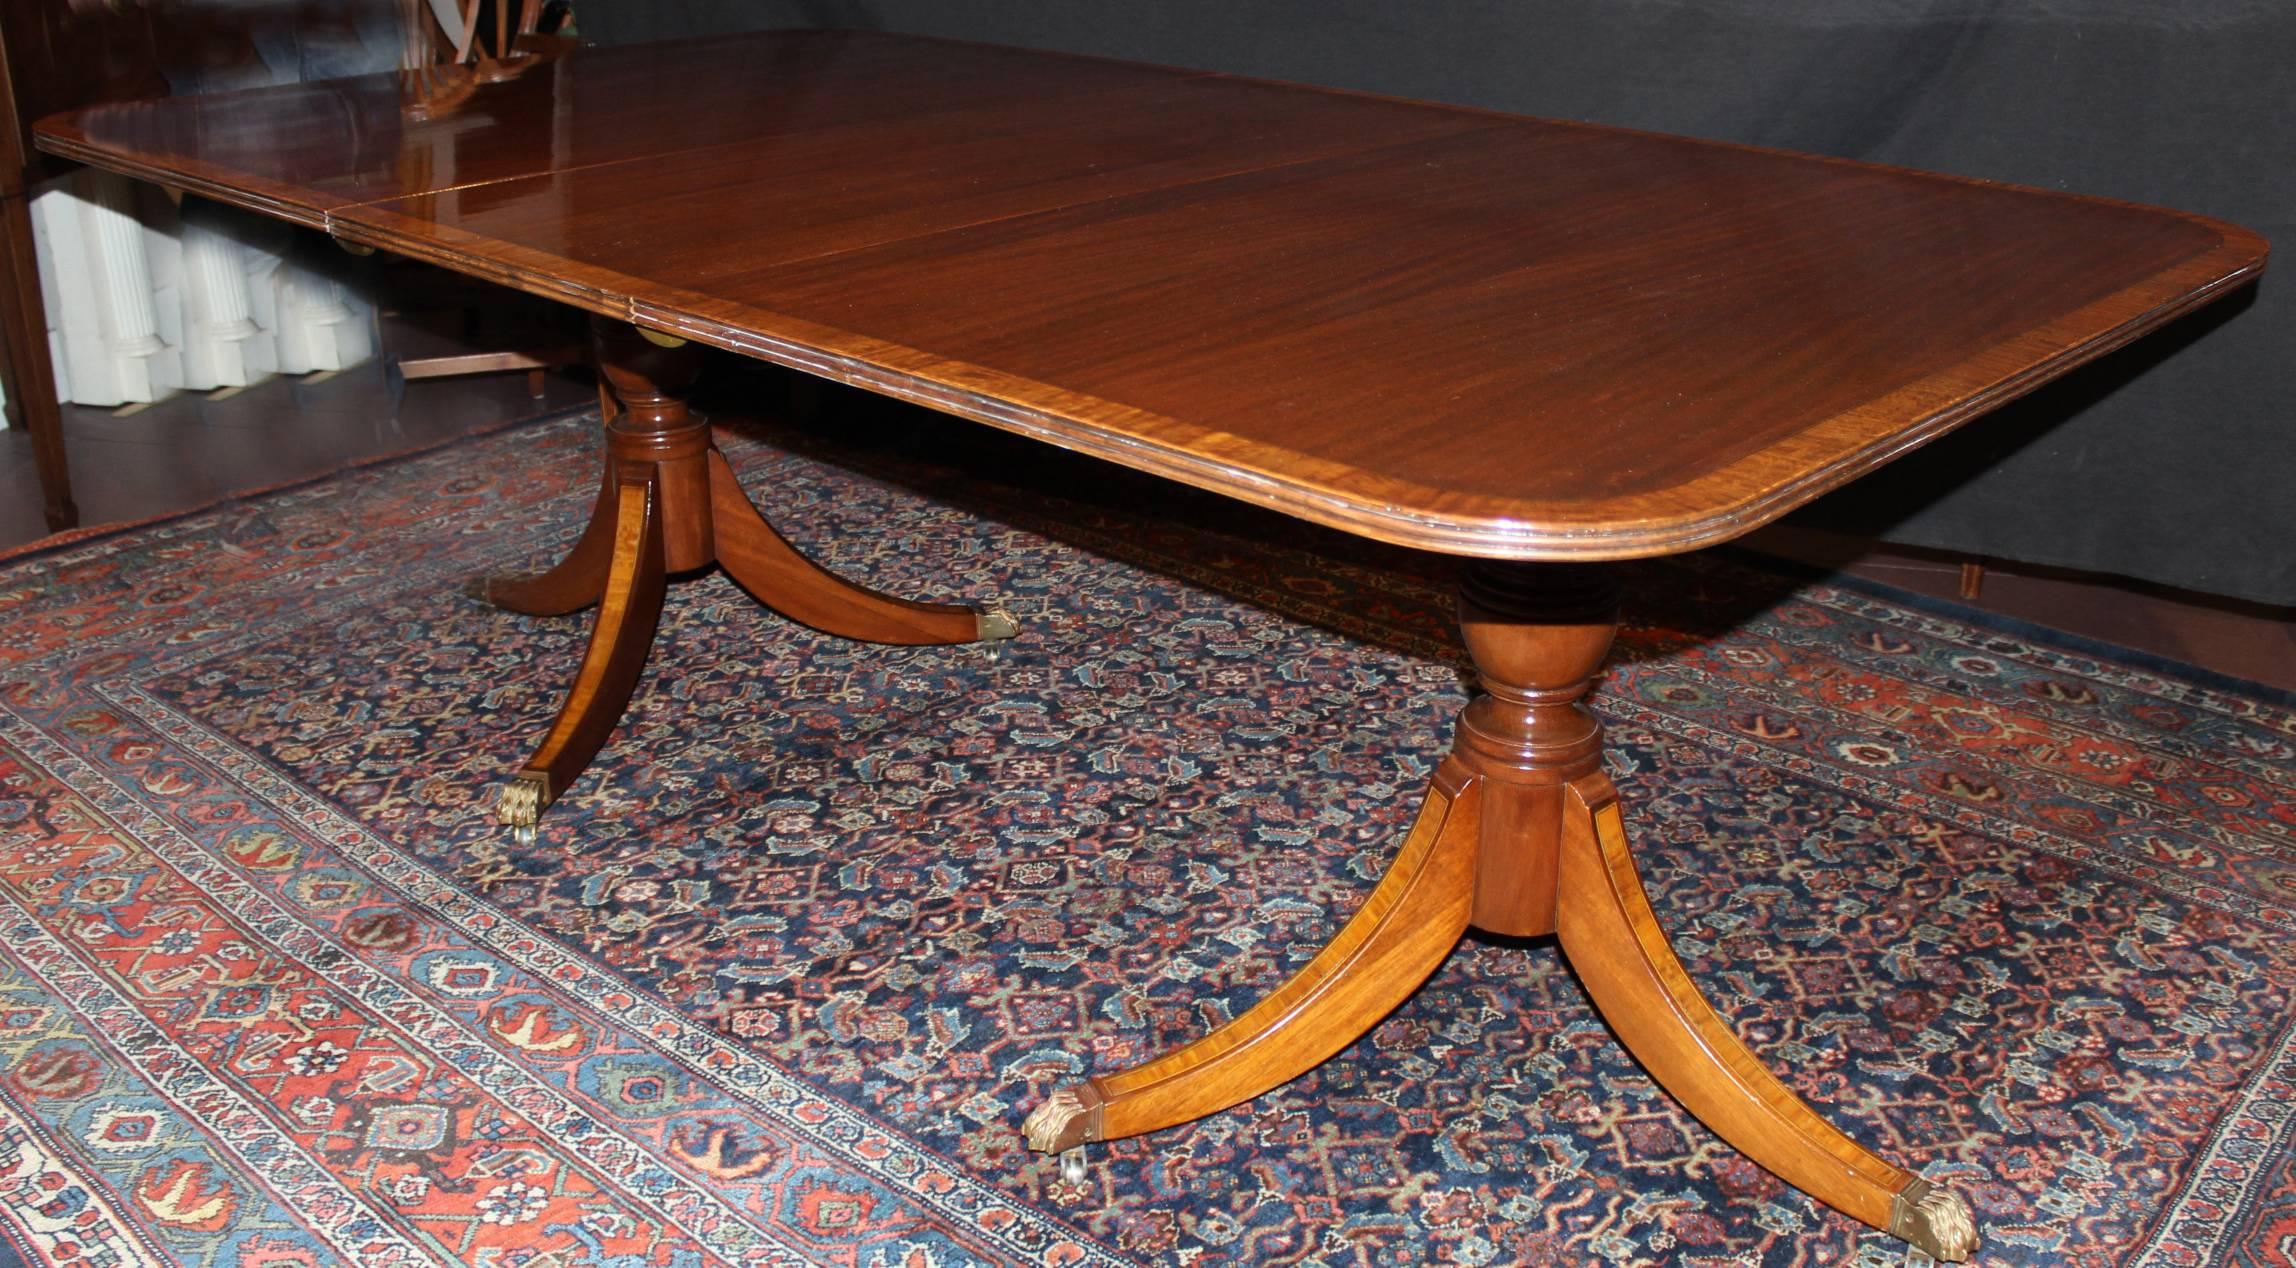 A fine Georgian style rectangle mahogany veneered double pedestal dining table, its top with rounded corners, triple reeded edge, satinwood inlaid border, each turned pedestal with three down swept legs also highlighted with satinwood inlay,